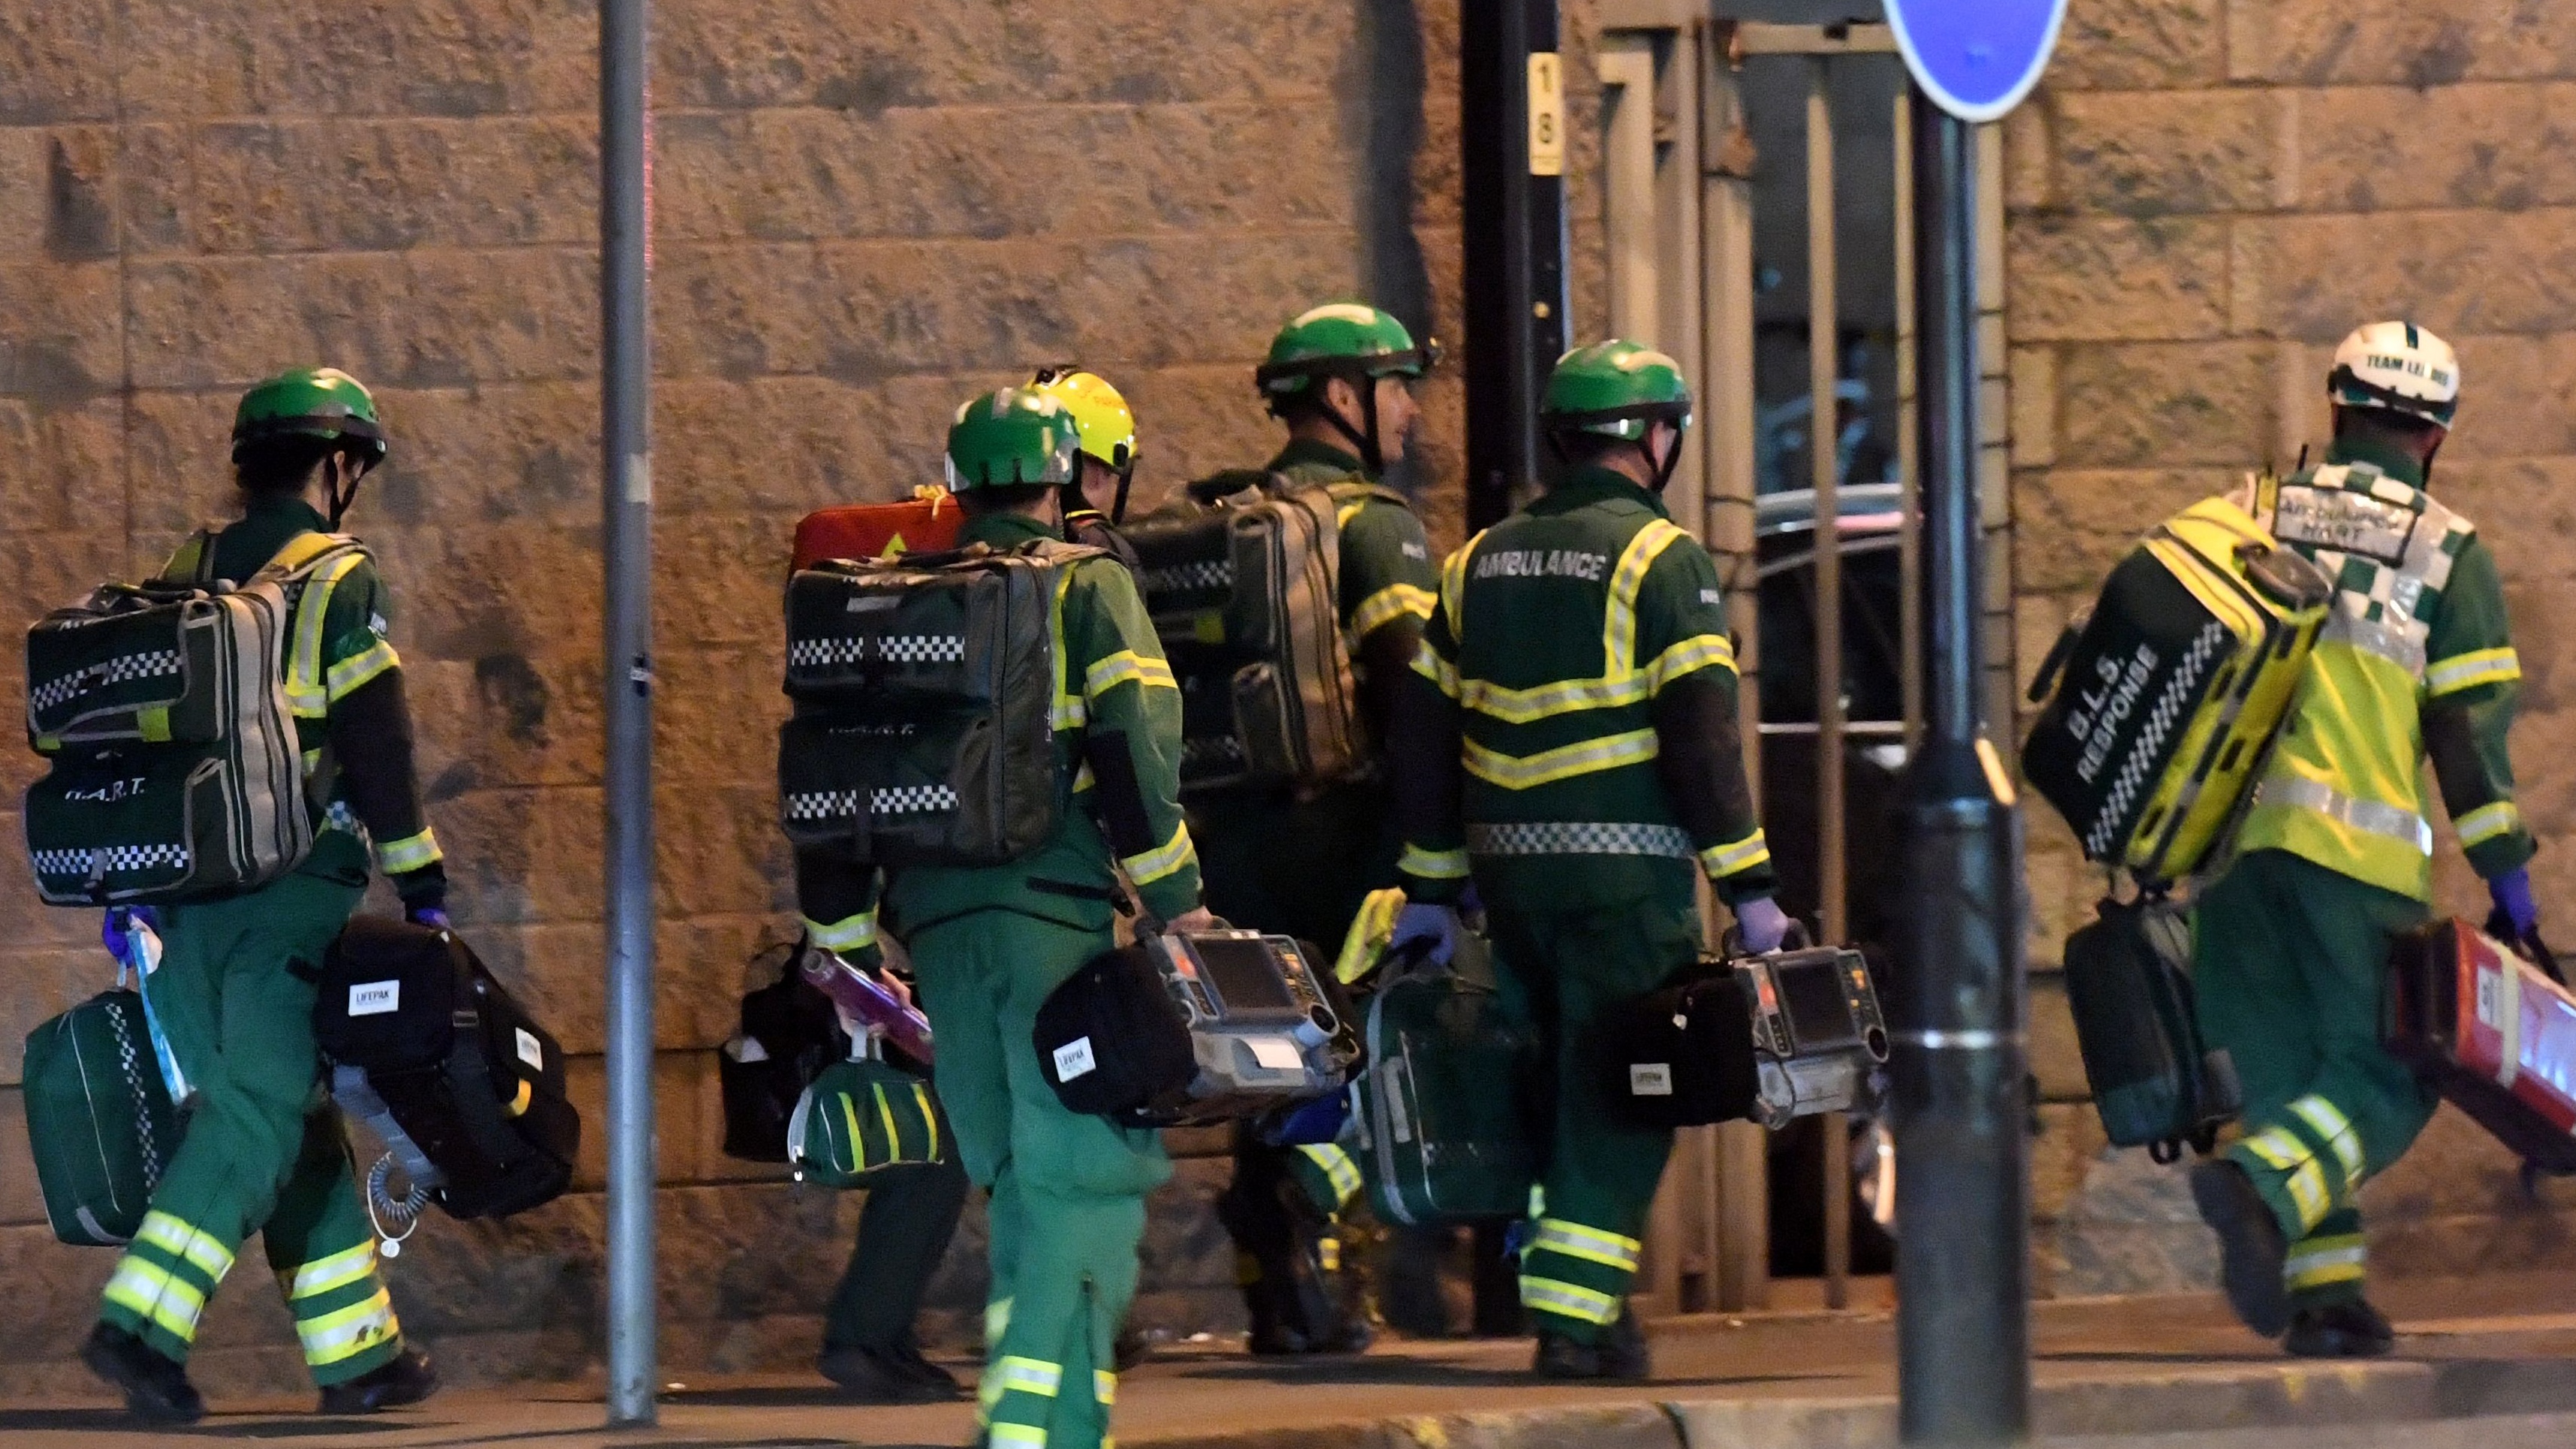 Paramedics arrive at the Manchester Arena in 2017